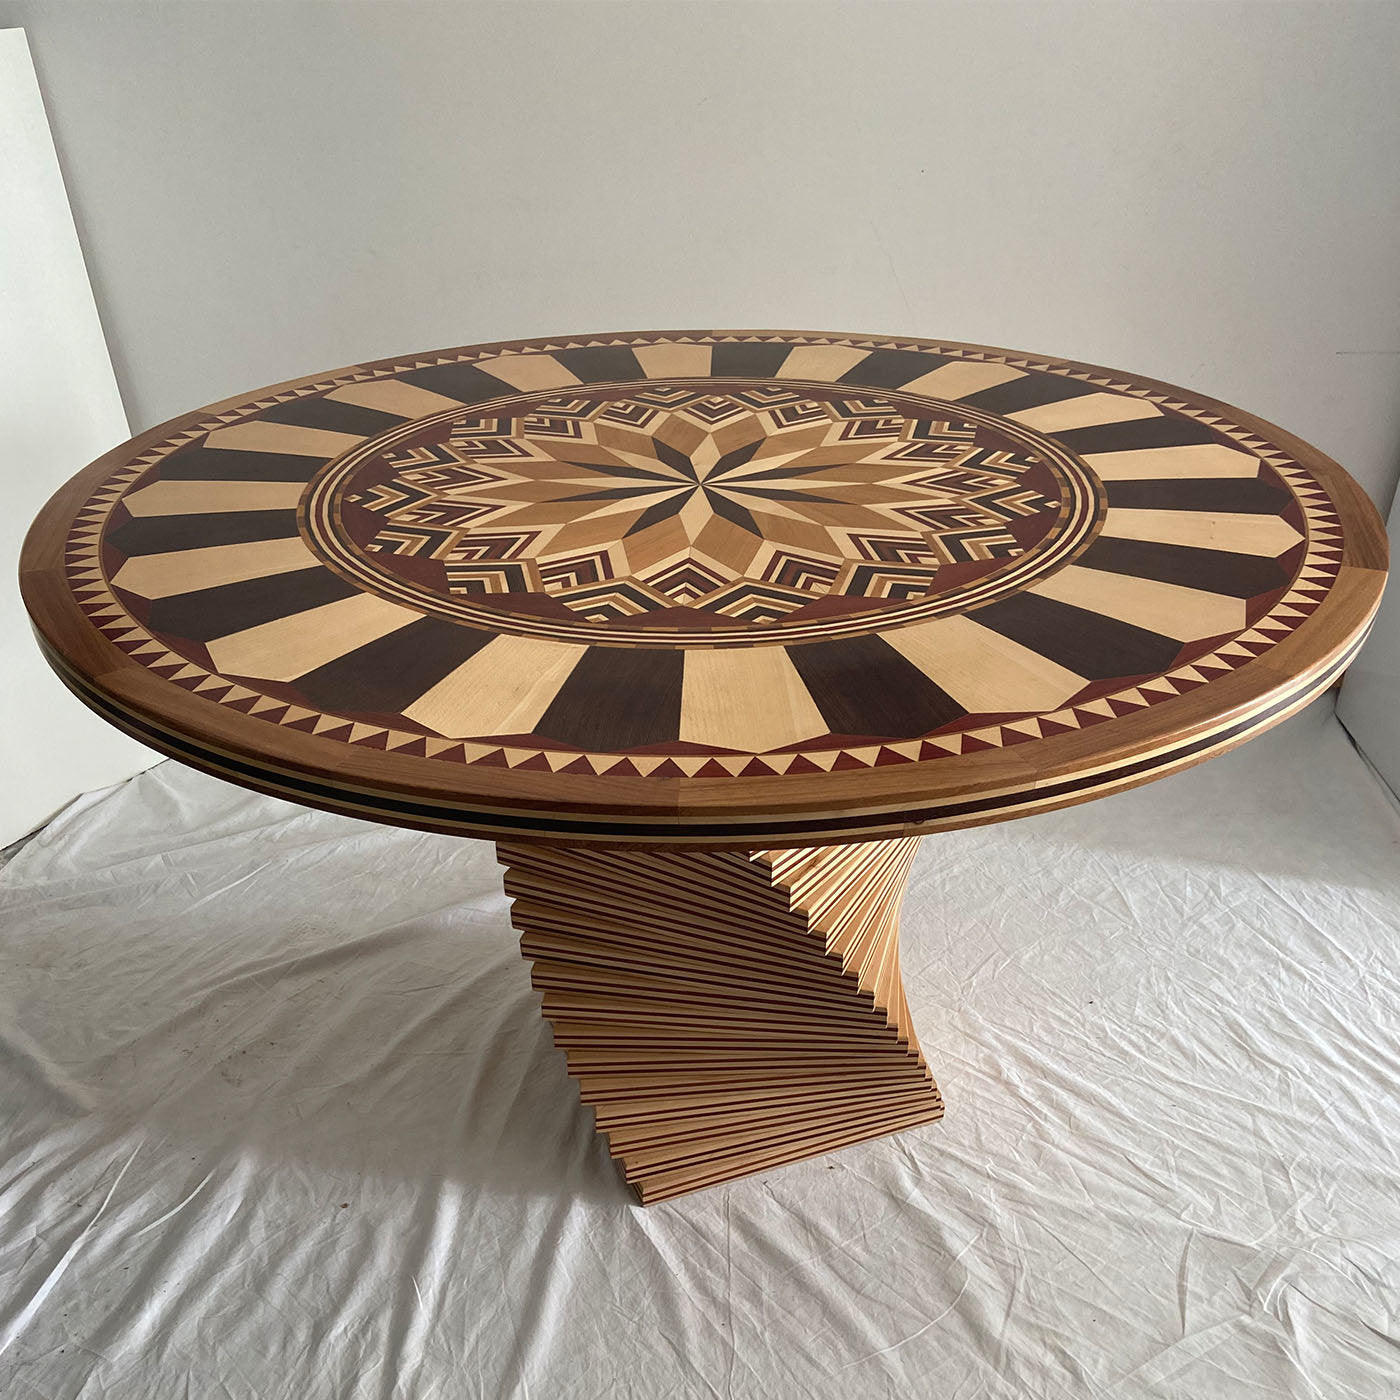 Fiore Round Dining Table - Alternative view 1